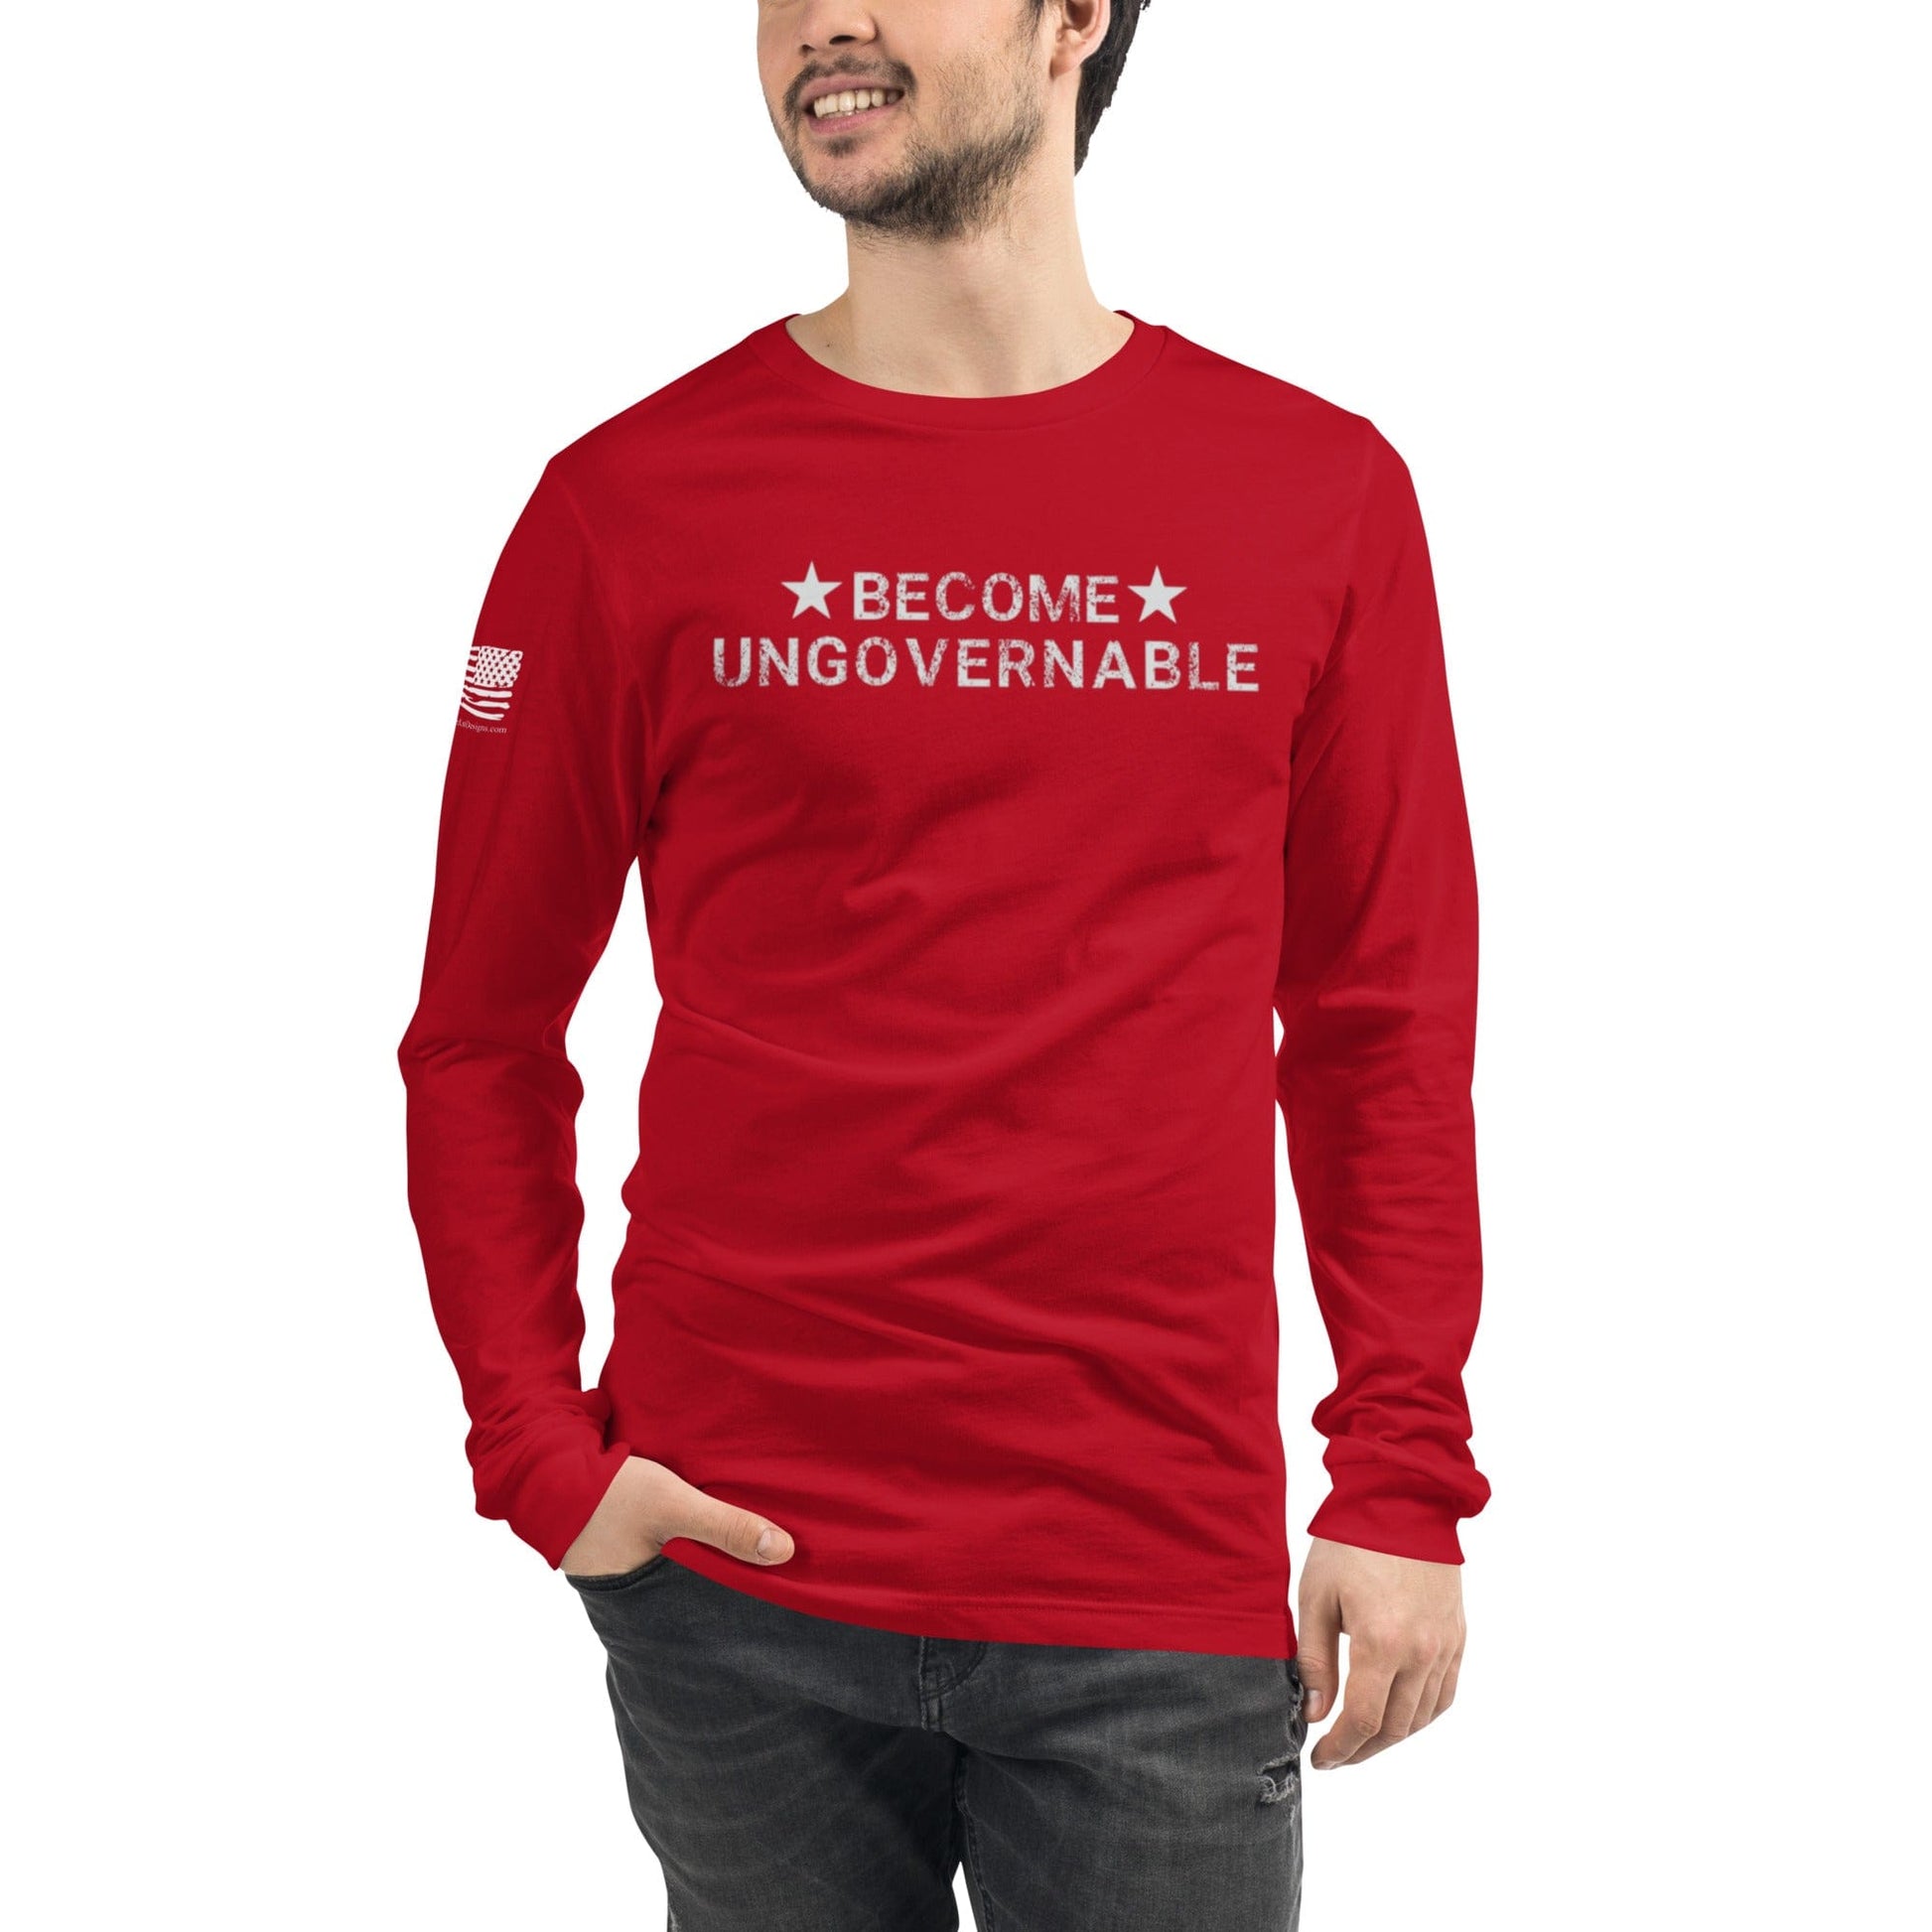 FreedomKat Designs Long Sleeved Shirt Red / S Become Ungovernable Long Sleeve Shirt